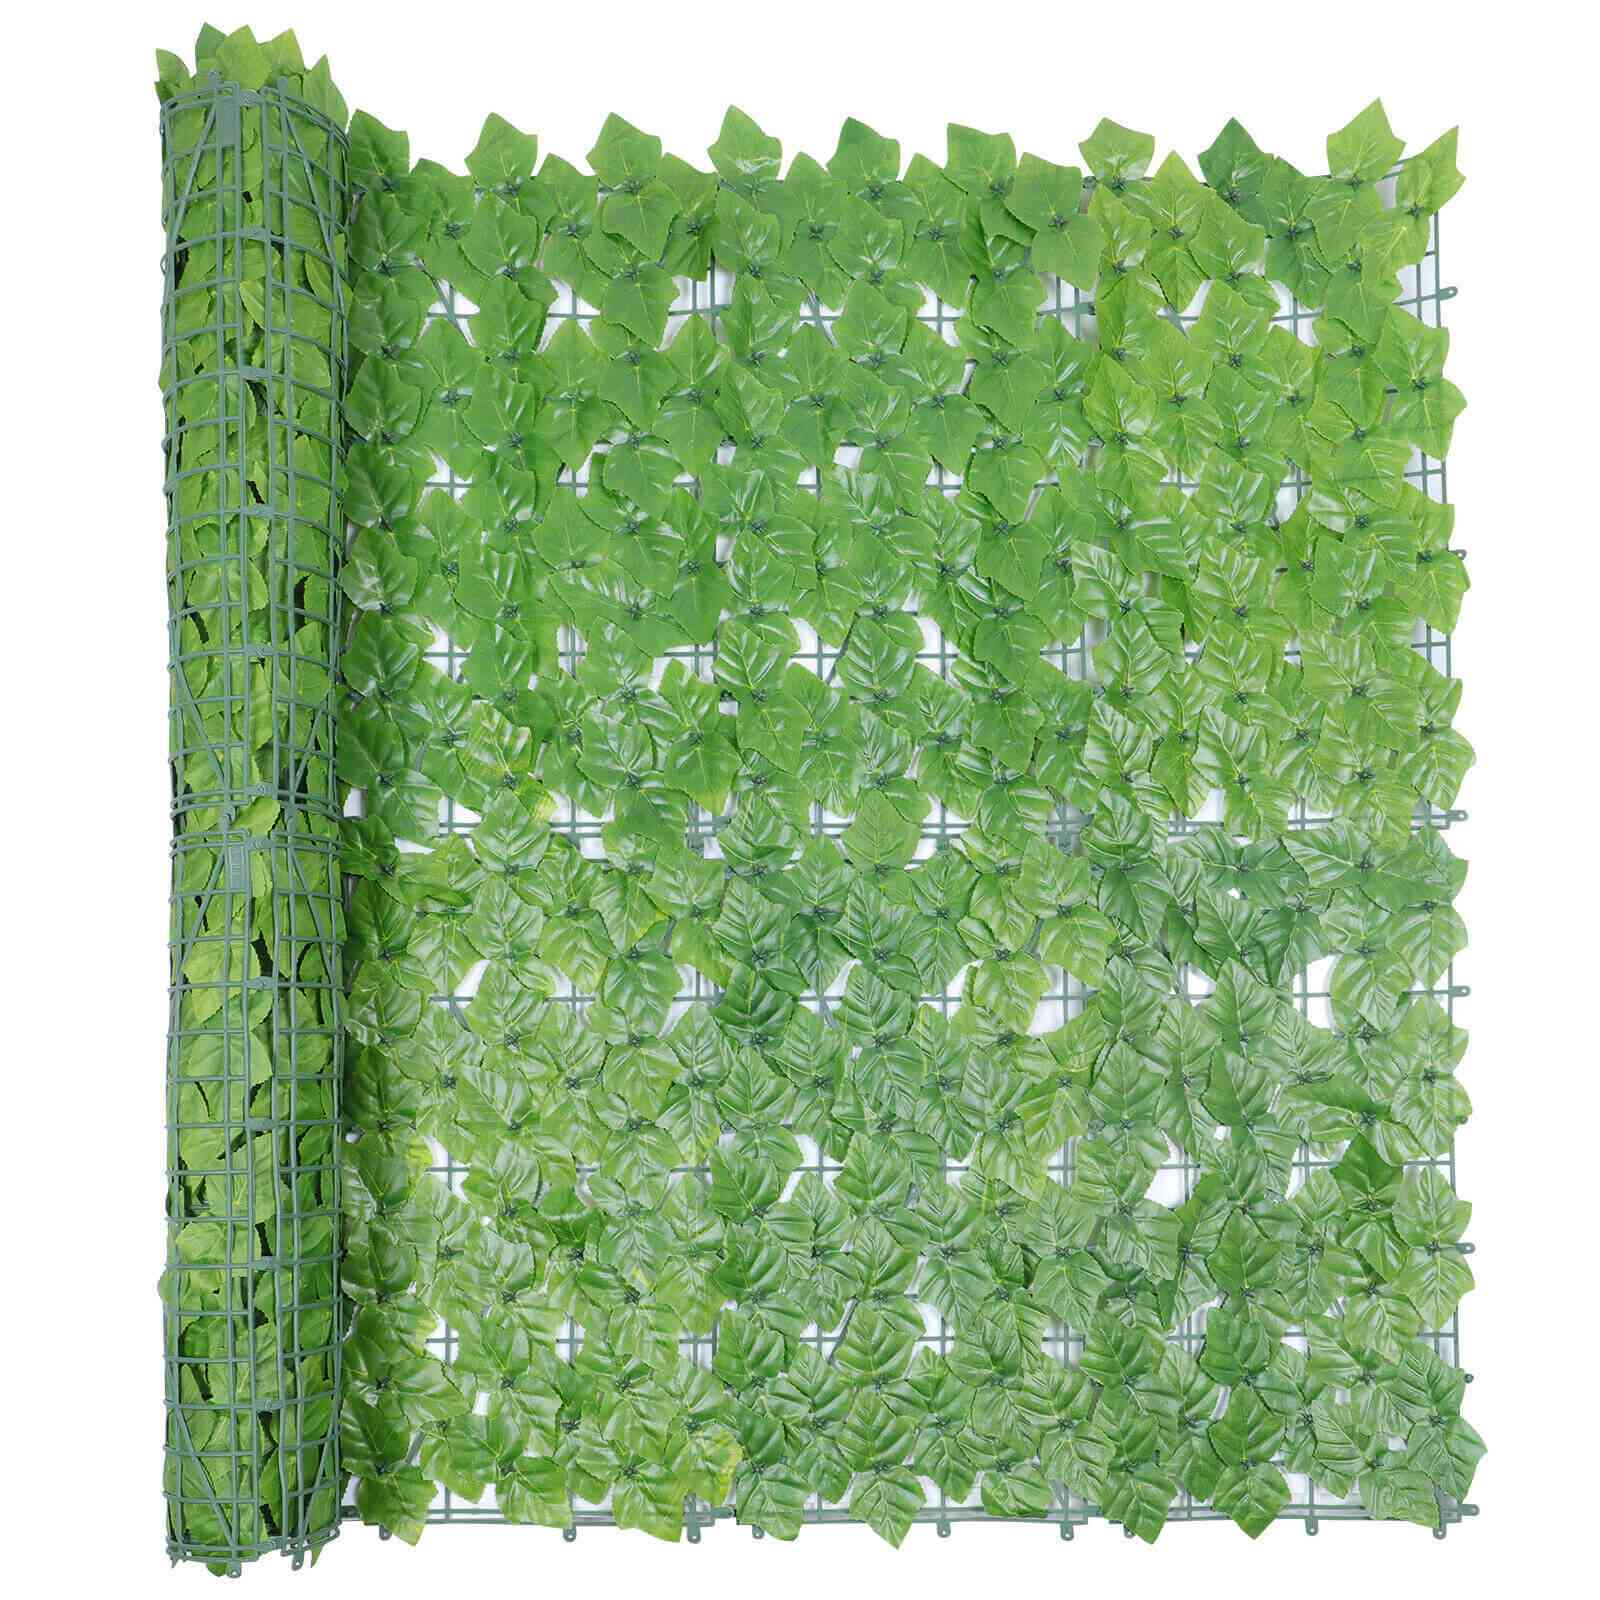 Display of Privacy Artificial Fence Screen